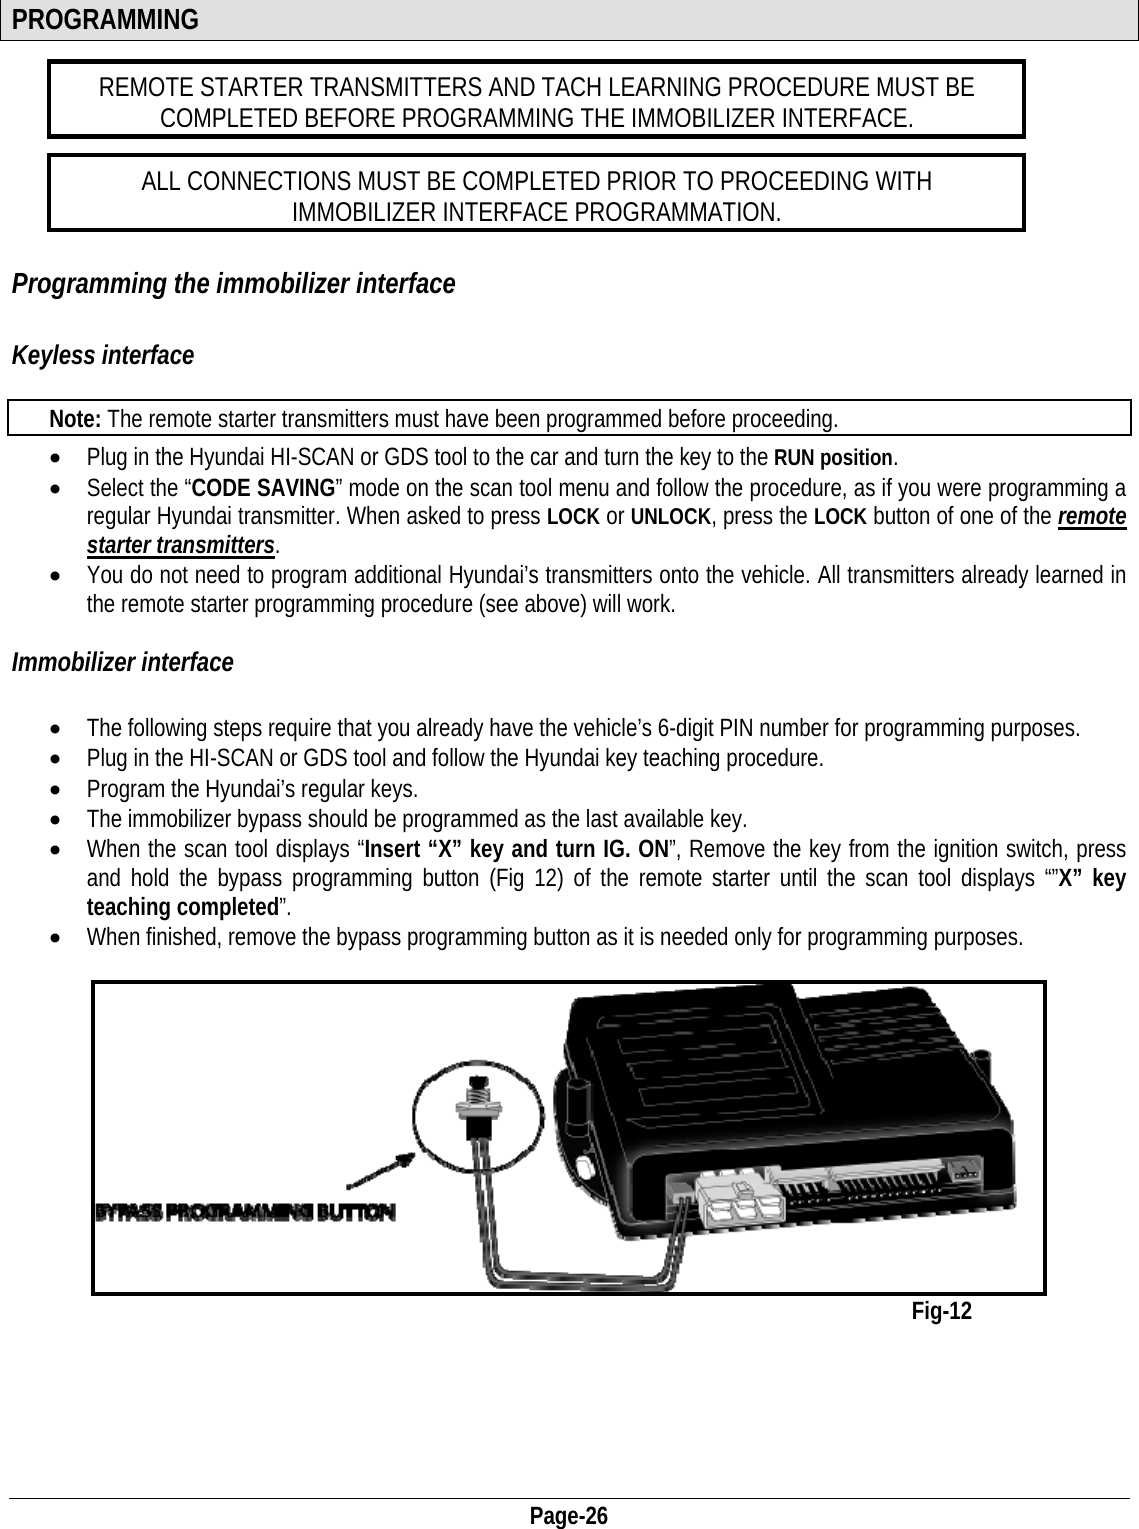  Page-26 PROGRAMMING  REMOTE STARTER TRANSMITTERS AND TACH LEARNING PROCEDURE MUST BE COMPLETED BEFORE PROGRAMMING THE IMMOBILIZER INTERFACE.  ALL CONNECTIONS MUST BE COMPLETED PRIOR TO PROCEEDING WITH IMMOBILIZER INTERFACE PROGRAMMATION.        Programming the immobilizer interface  Keyless interface  Note: The remote starter transmitters must have been programmed before proceeding. • Plug in the Hyundai HI-SCAN or GDS tool to the car and turn the key to the RUN position. • Select the “CODE SAVING” mode on the scan tool menu and follow the procedure, as if you were programming a regular Hyundai transmitter. When asked to press LOCK or UNLOCK, press the LOCK button of one of the remote starter transmitters.  • You do not need to program additional Hyundai’s transmitters onto the vehicle. All transmitters already learned in the remote starter programming procedure (see above) will work.  Immobilizer interface  • The following steps require that you already have the vehicle’s 6-digit PIN number for programming purposes. • Plug in the HI-SCAN or GDS tool and follow the Hyundai key teaching procedure. • Program the Hyundai’s regular keys. • The immobilizer bypass should be programmed as the last available key.  • When the scan tool displays “Insert “X” key and turn IG. ON”, Remove the key from the ignition switch, press and hold the bypass programming button (Fig 12) of the remote starter until the scan tool displays “”X” key teaching completed”. • When finished, remove the bypass programming button as it is needed only for programming purposes.               Fig-12       